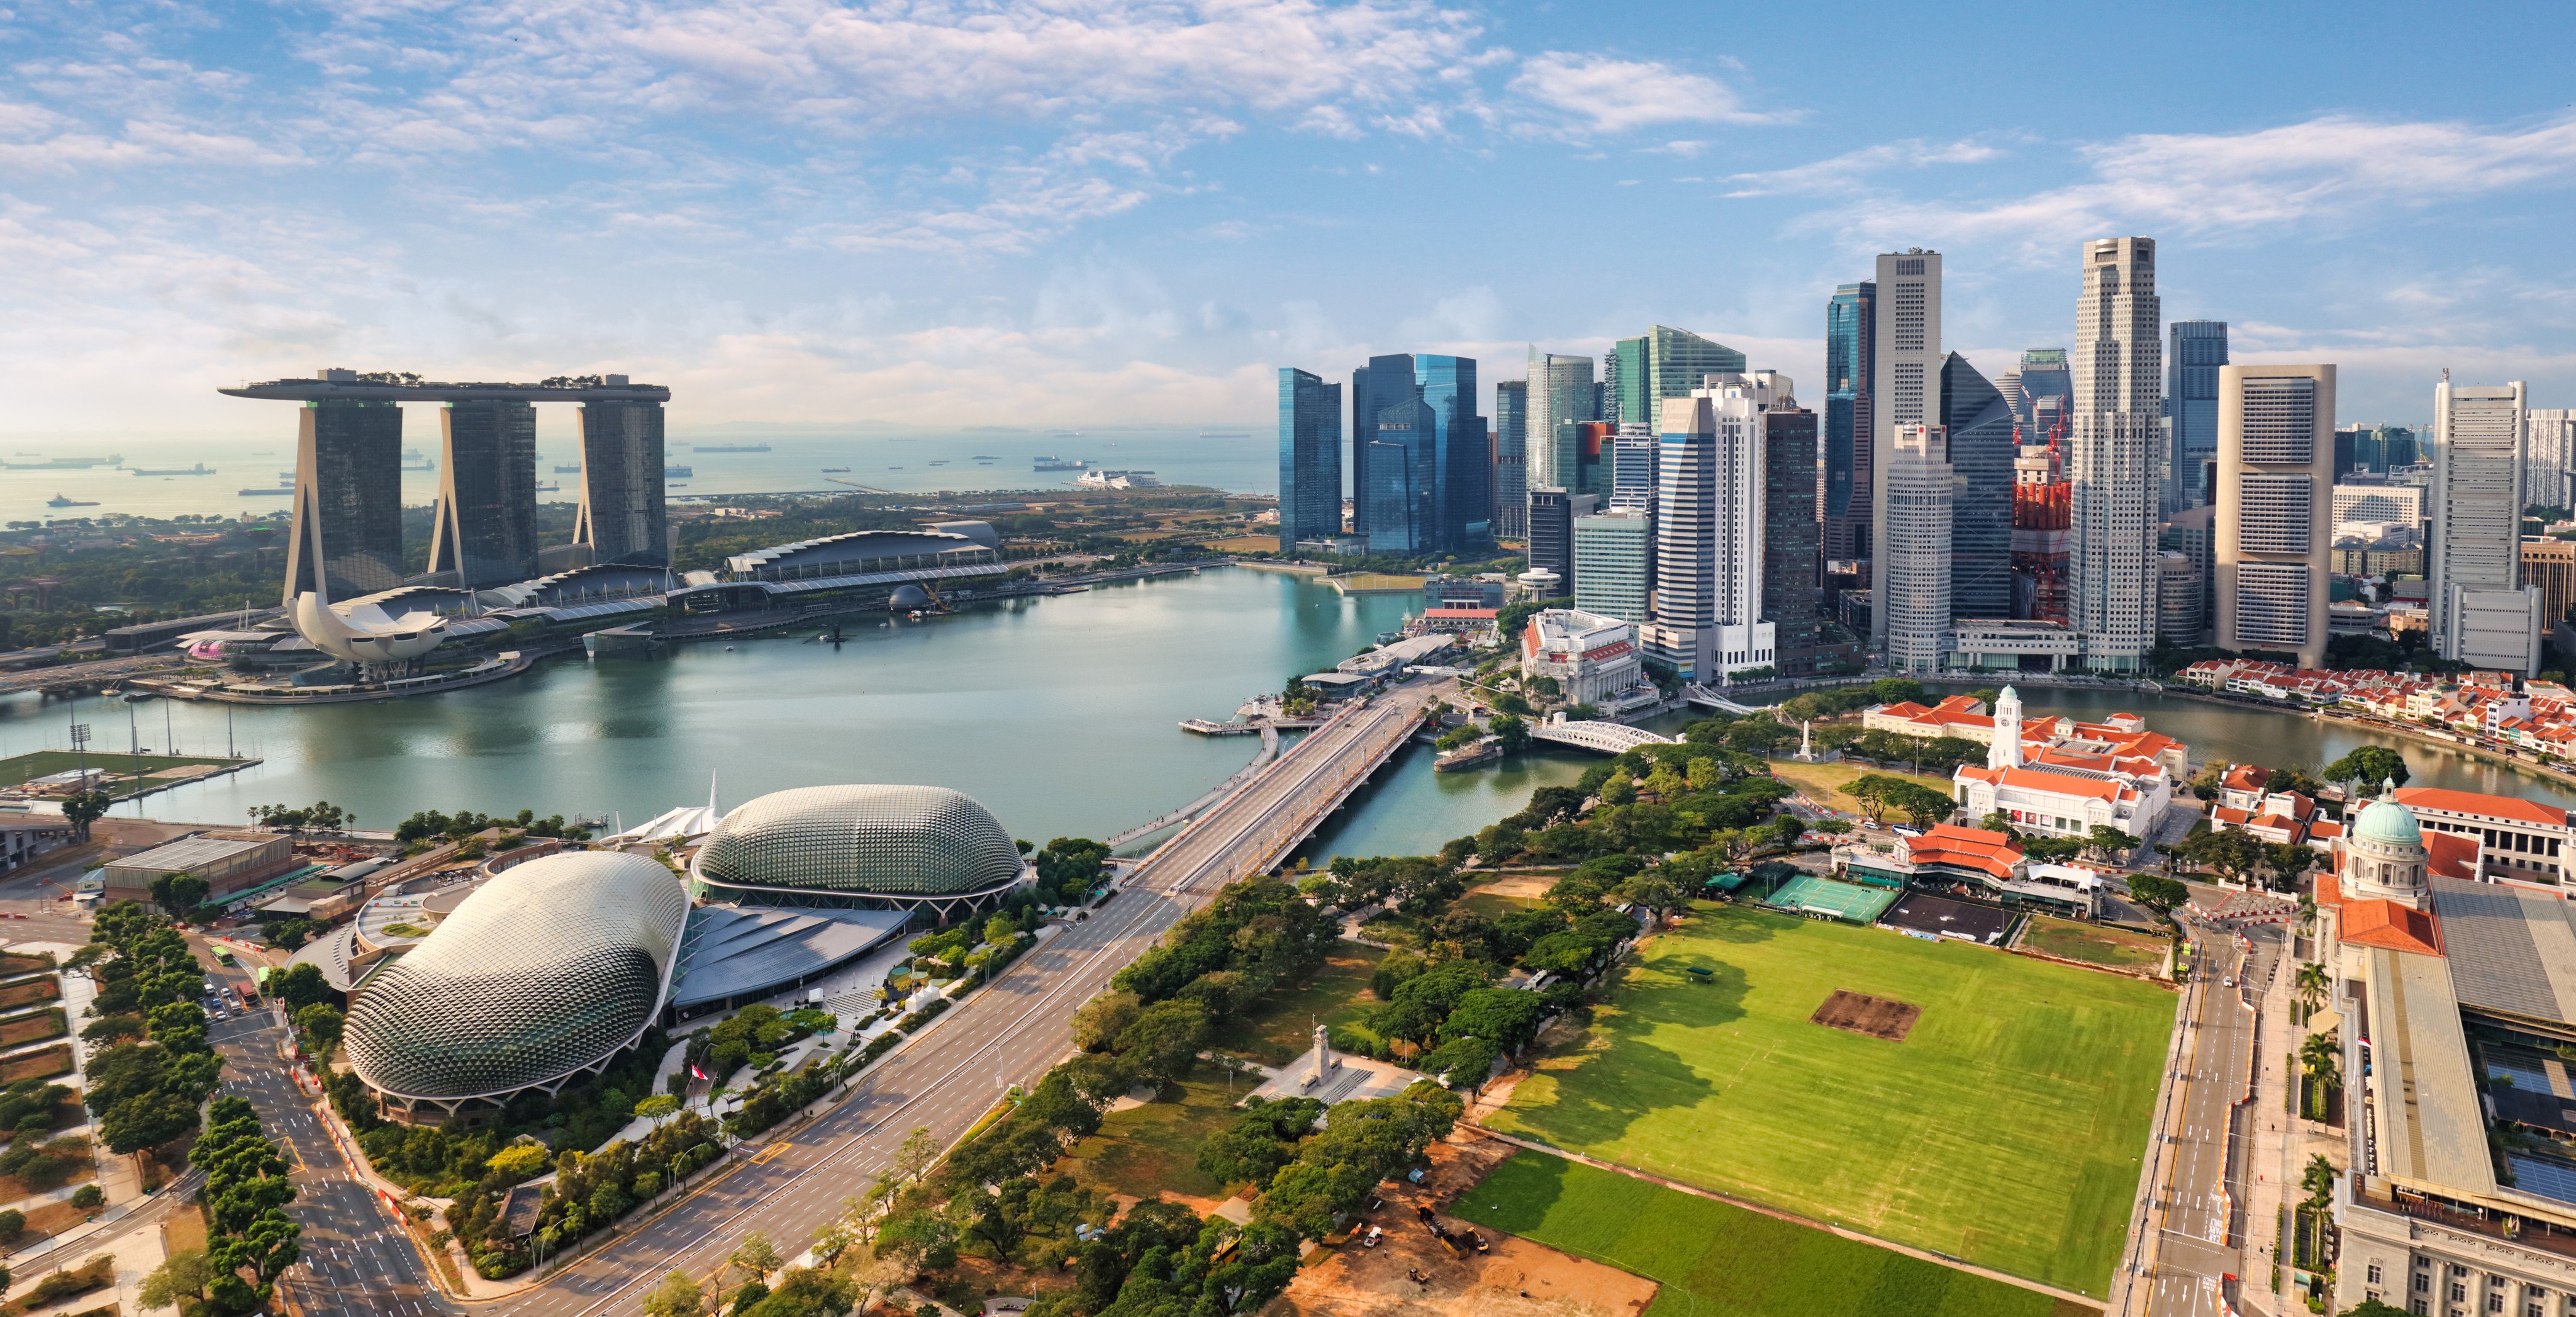 Aerial view of Singapore. Photo: Shutterstock